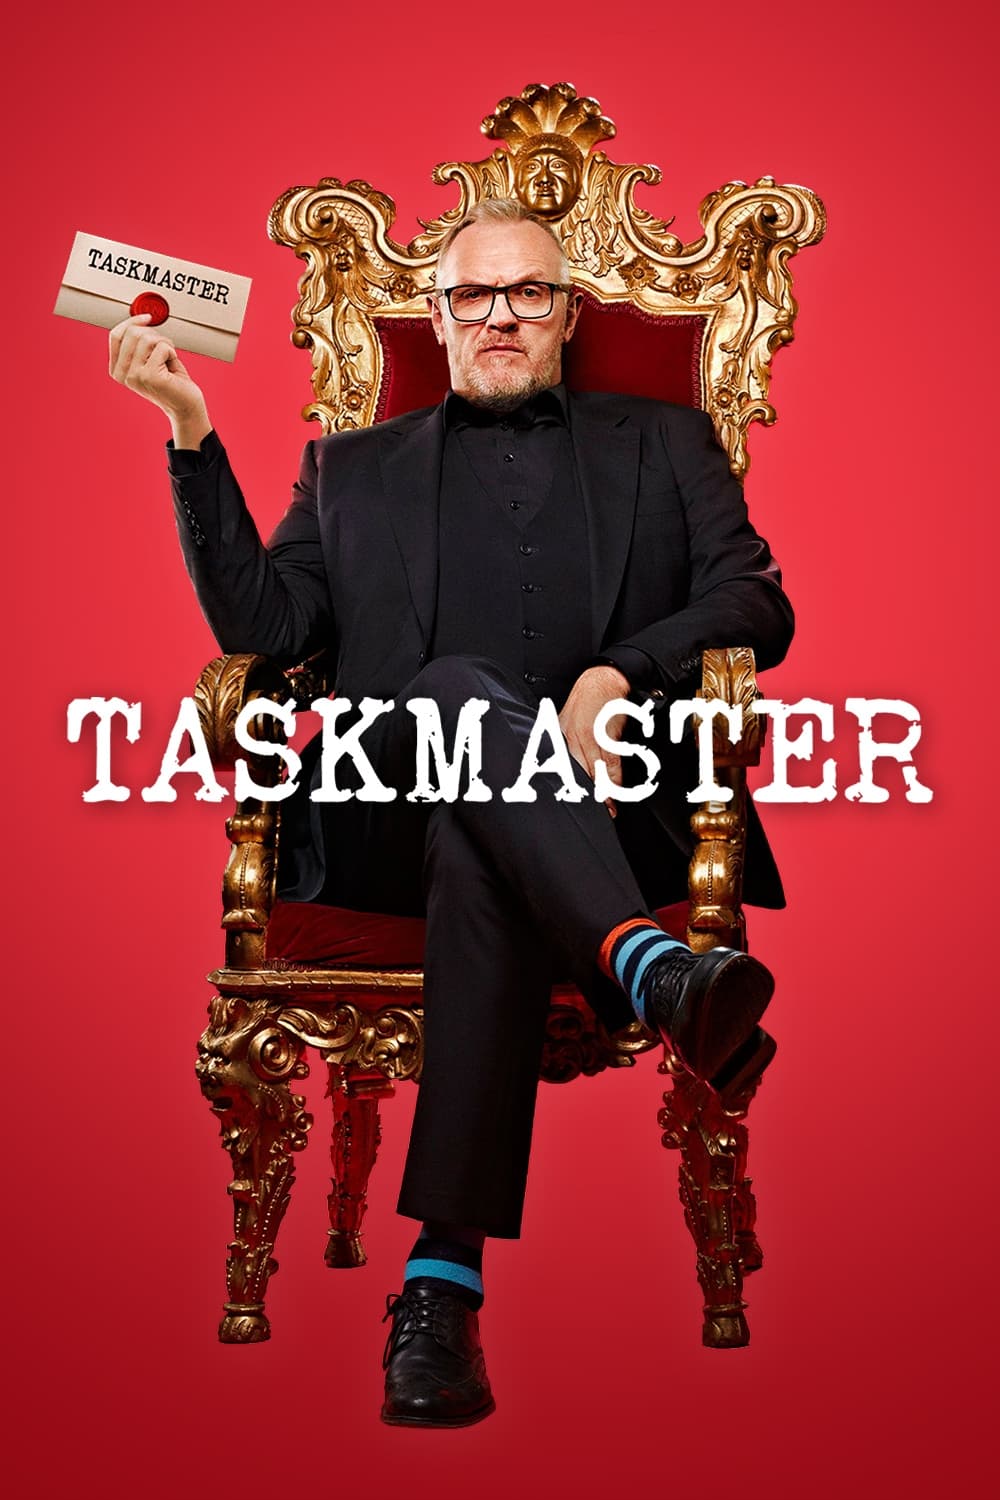 Taskmaster TV Shows About Challenge